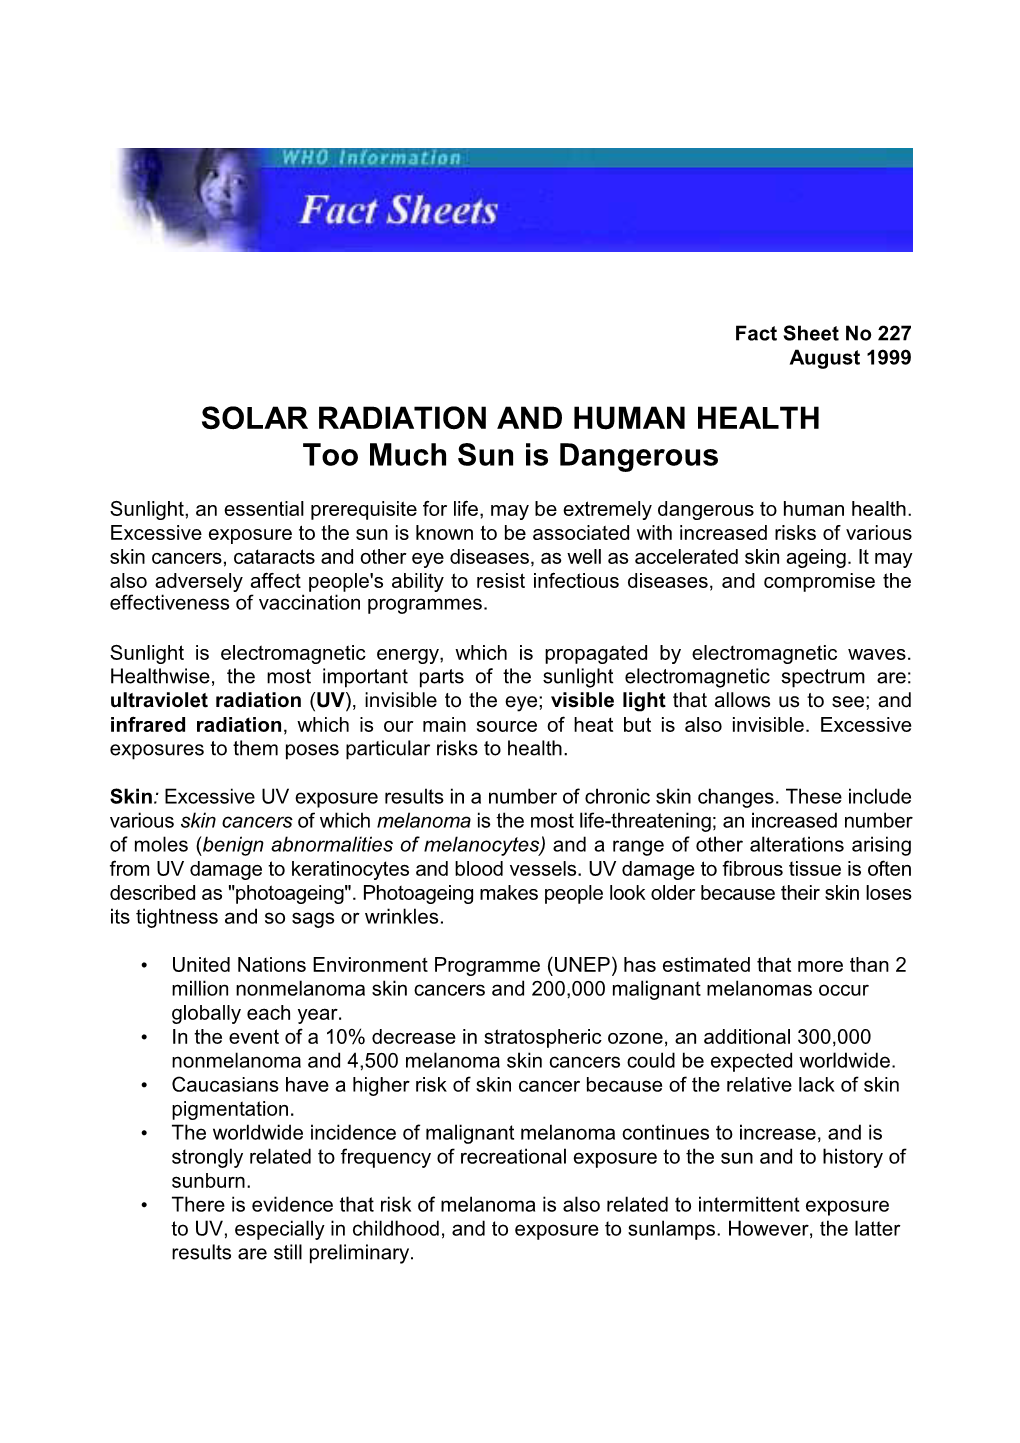 SOLAR RADIATION and HUMAN HEALTH Too Much Sun Is Dangerous